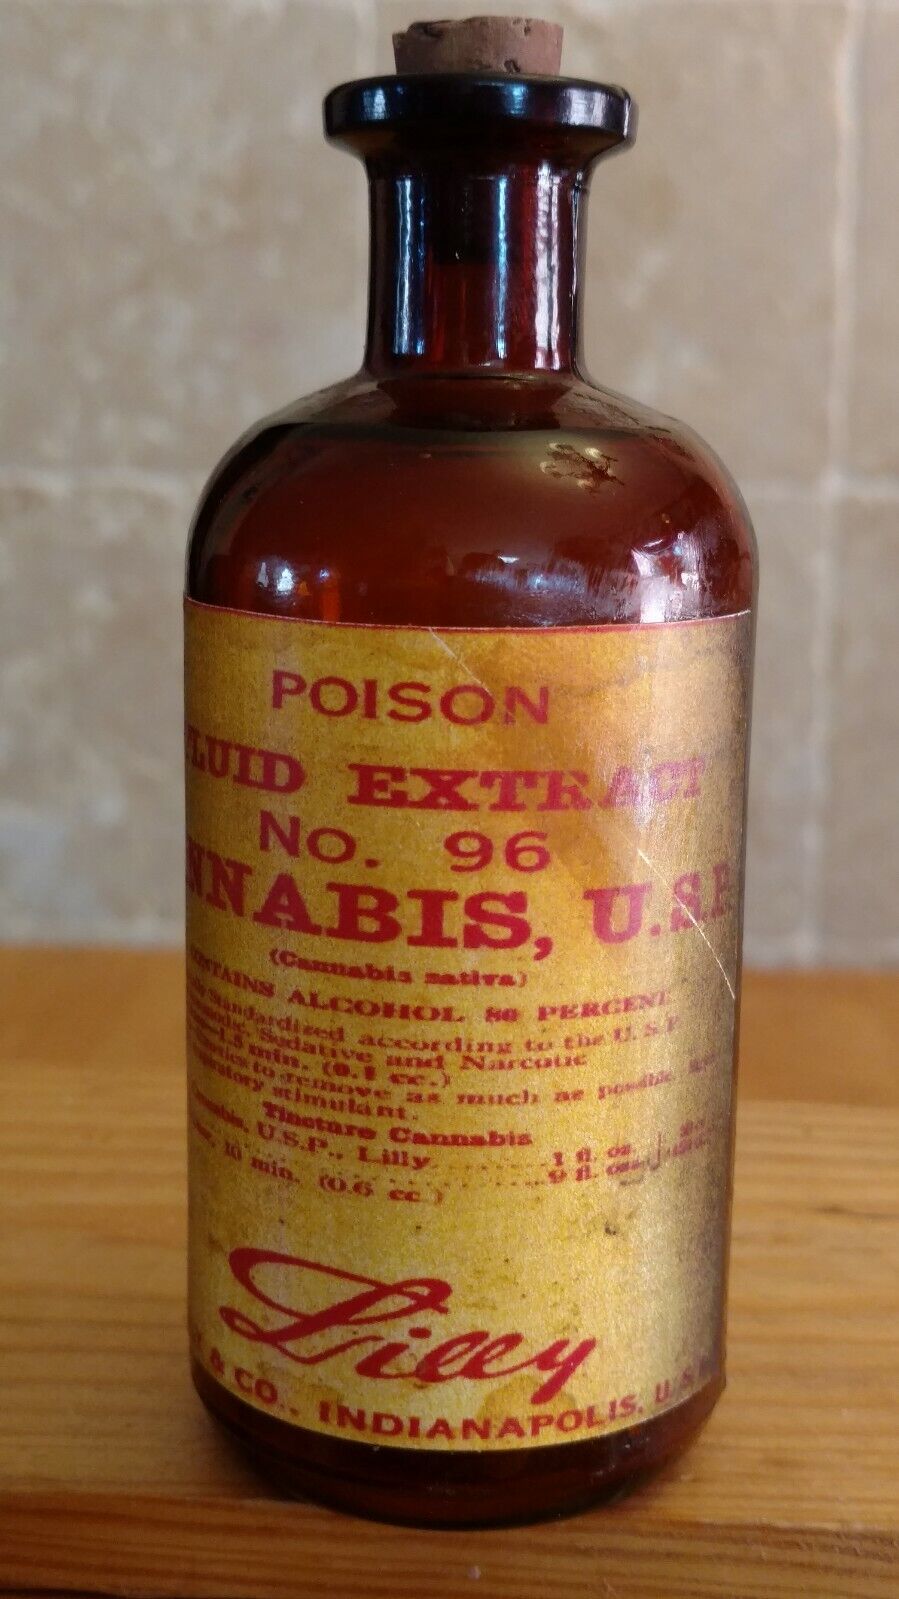 Vintage Medicine Hand Crafted Bottle, Cannabis Extract Lilly NO. 96 (EMPTY, COPY